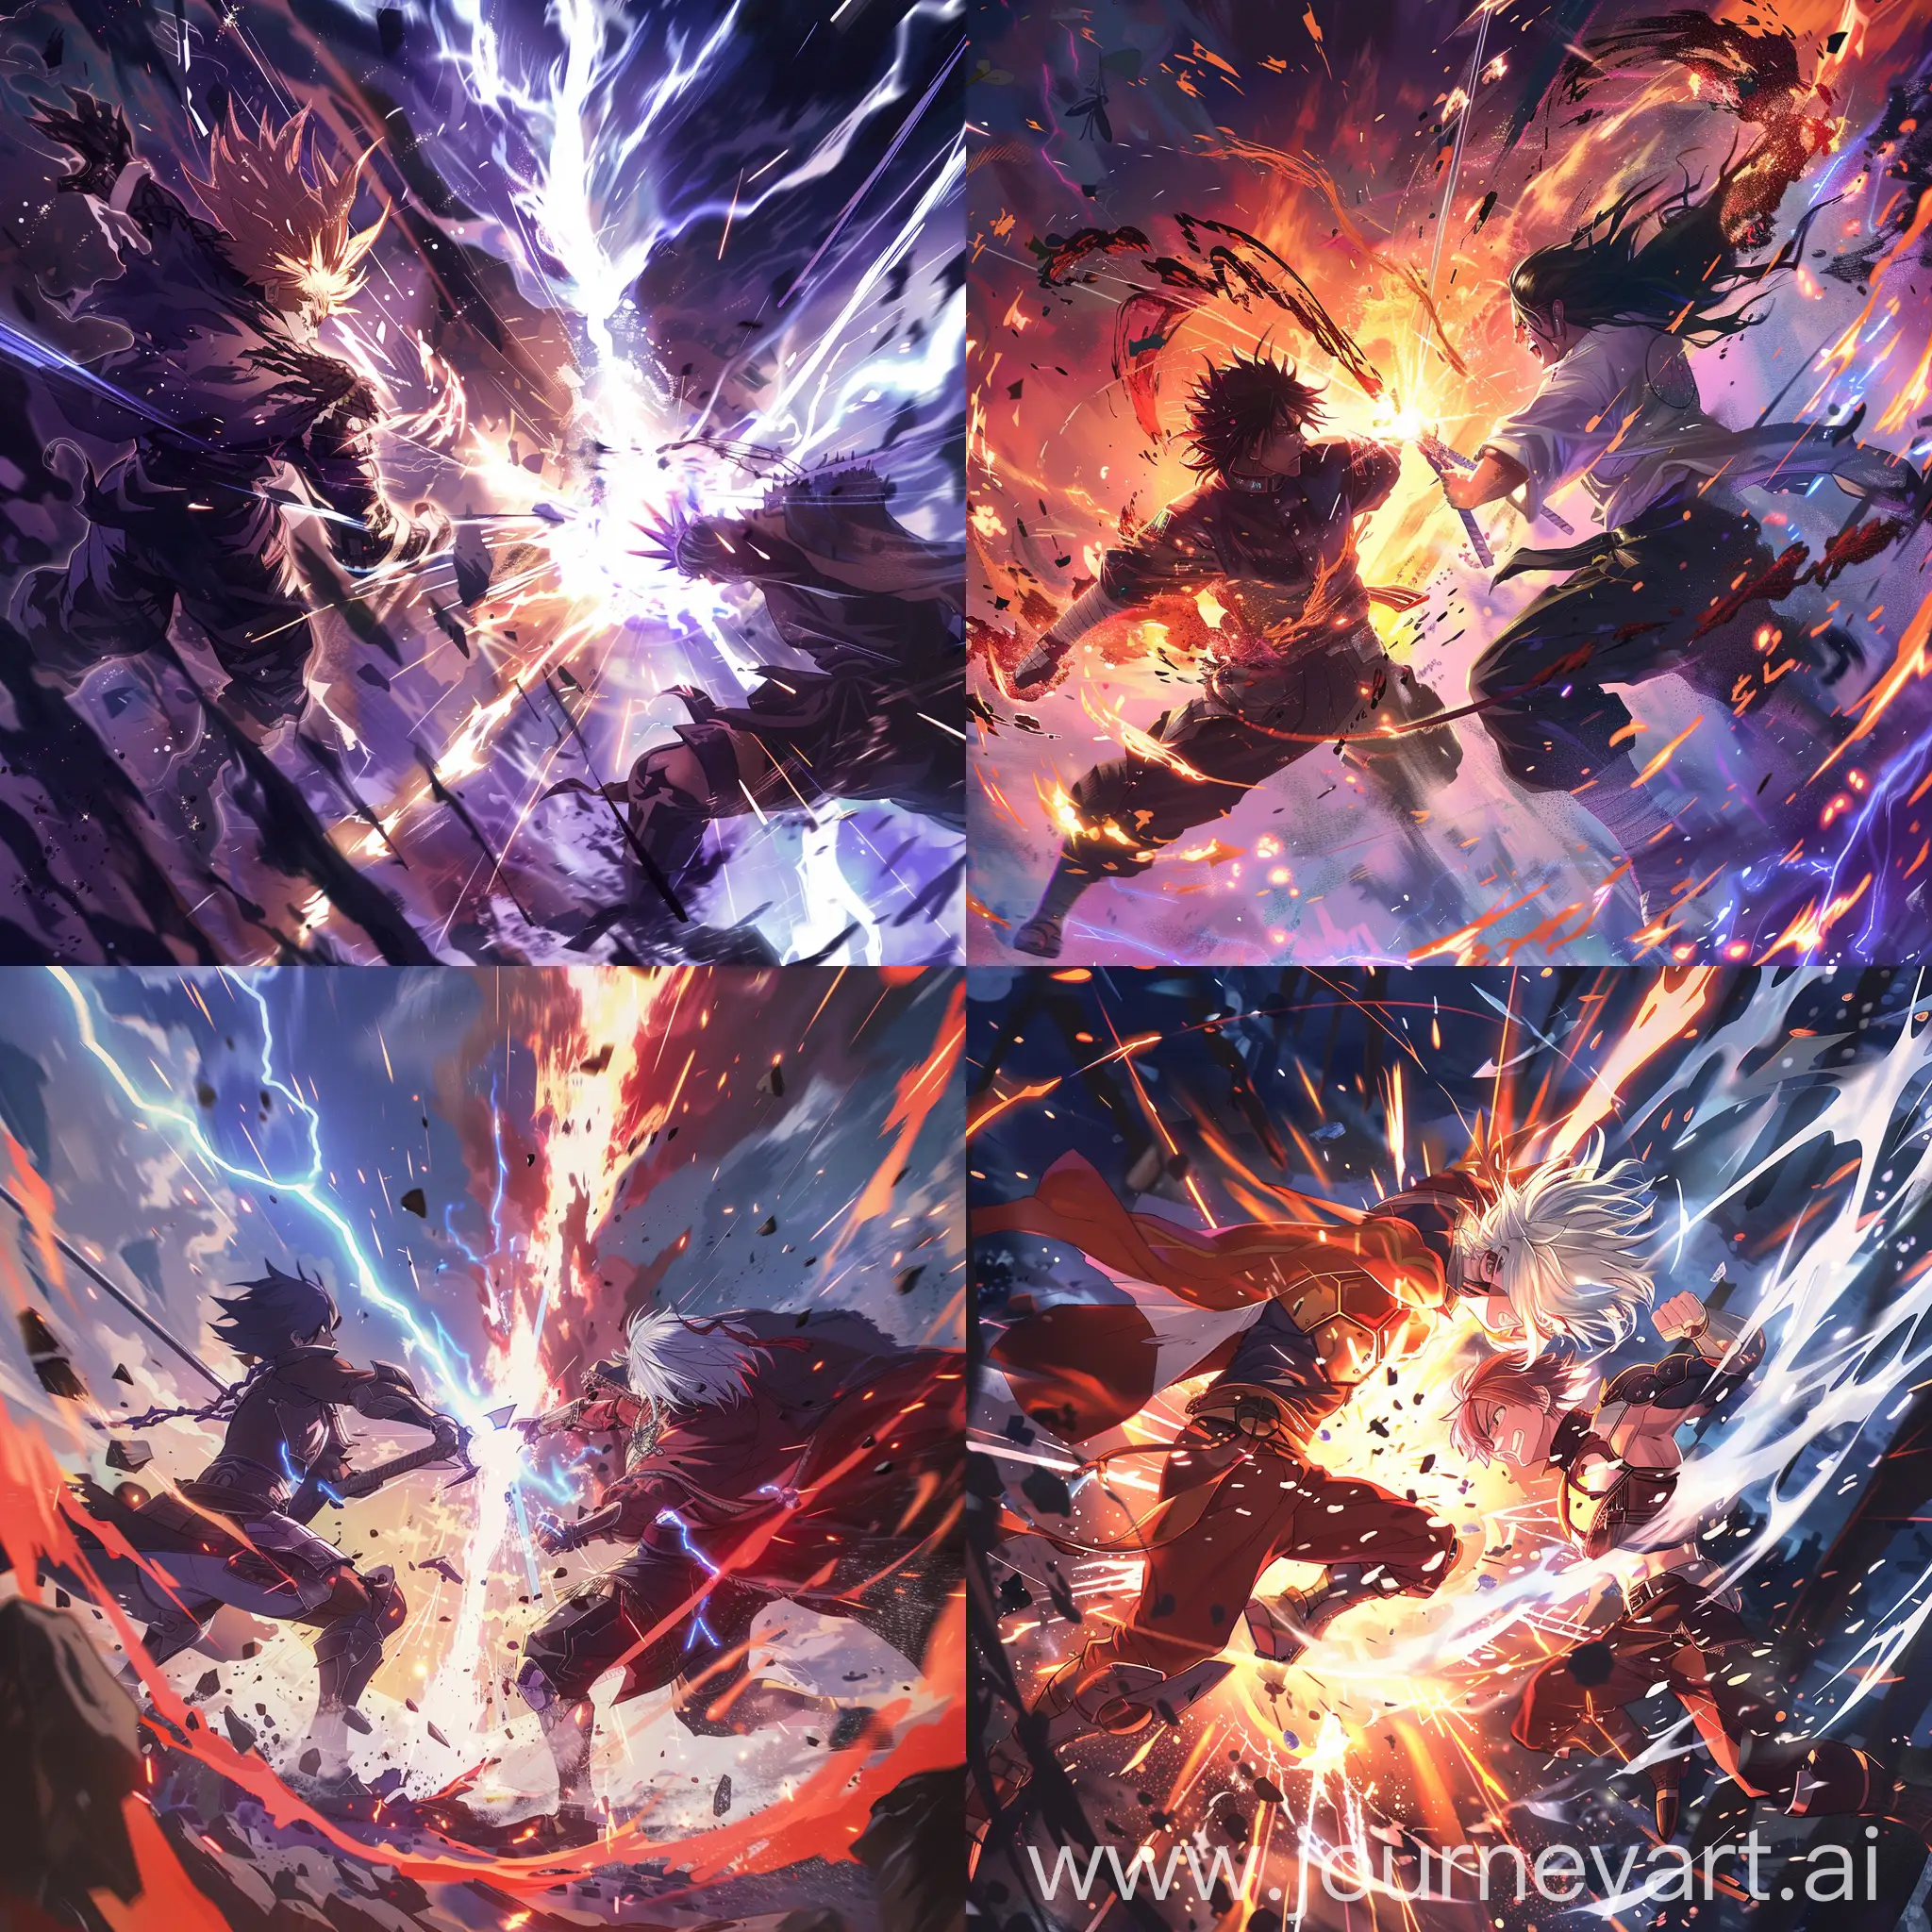 Intense-Anime-Battle-Art-Clash-of-Powerful-Characters-with-Dynamic-Poses-and-Impactful-Special-Effects